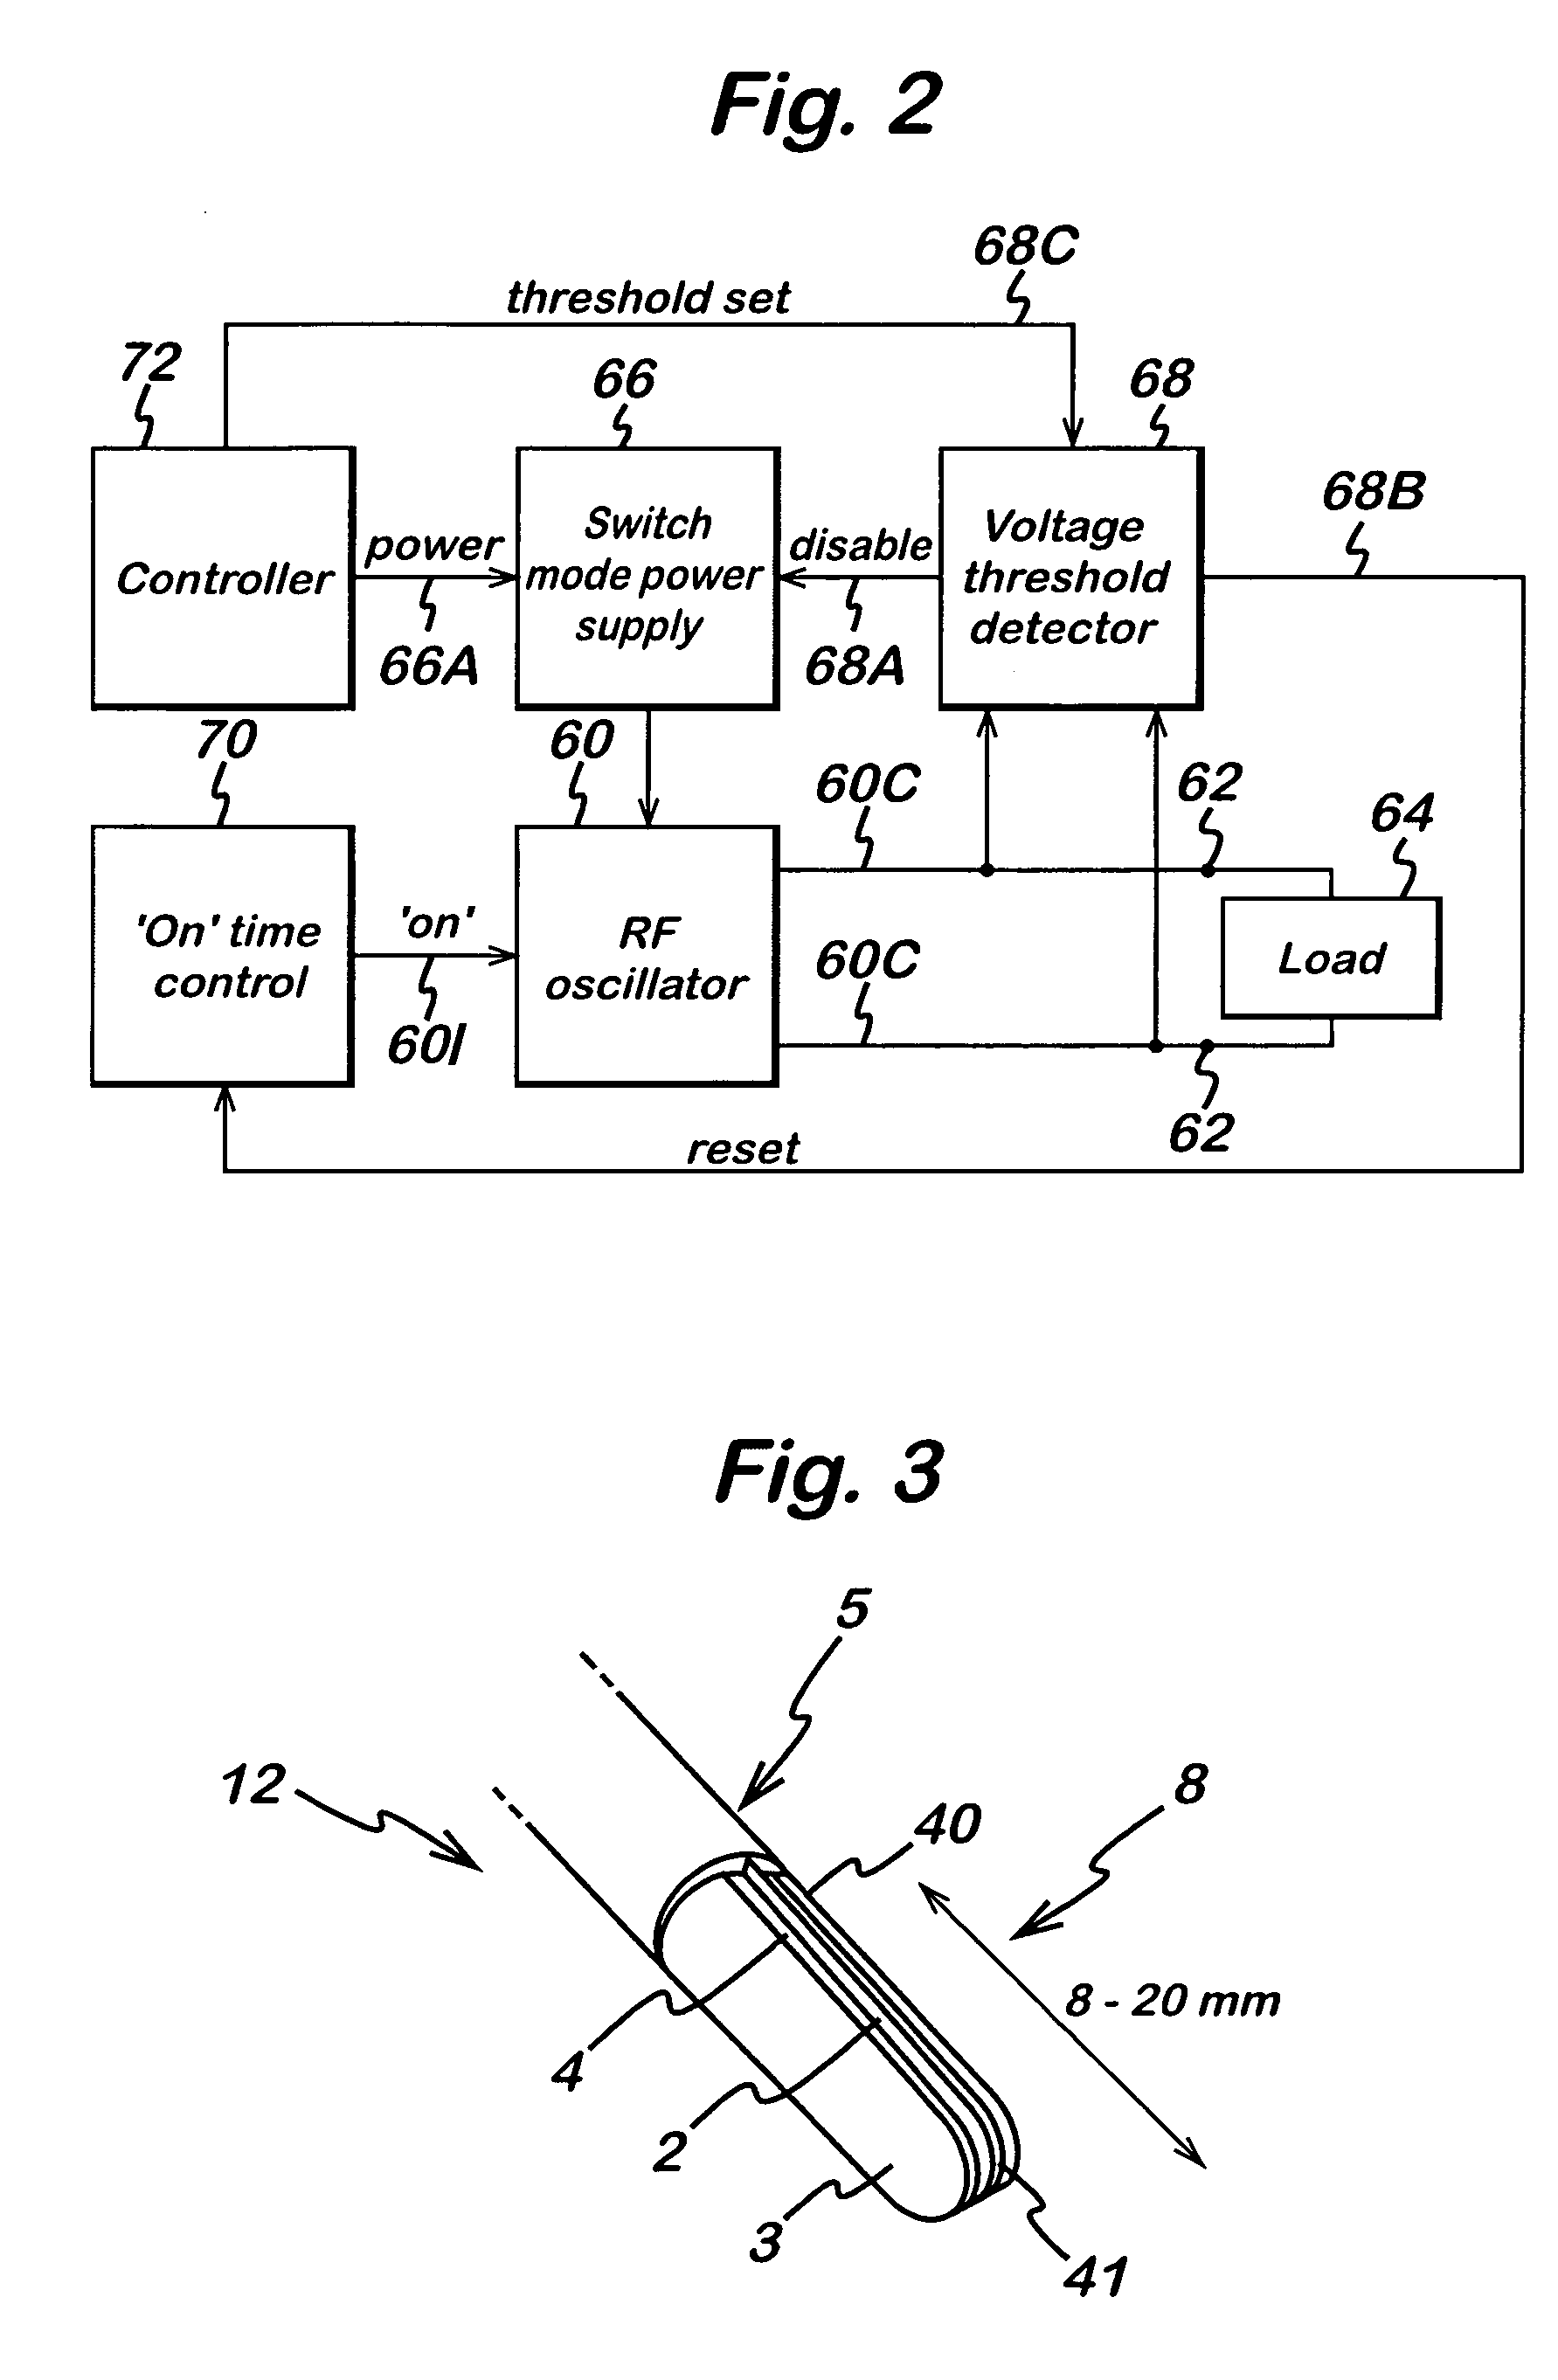 Electrosurgical generator and system